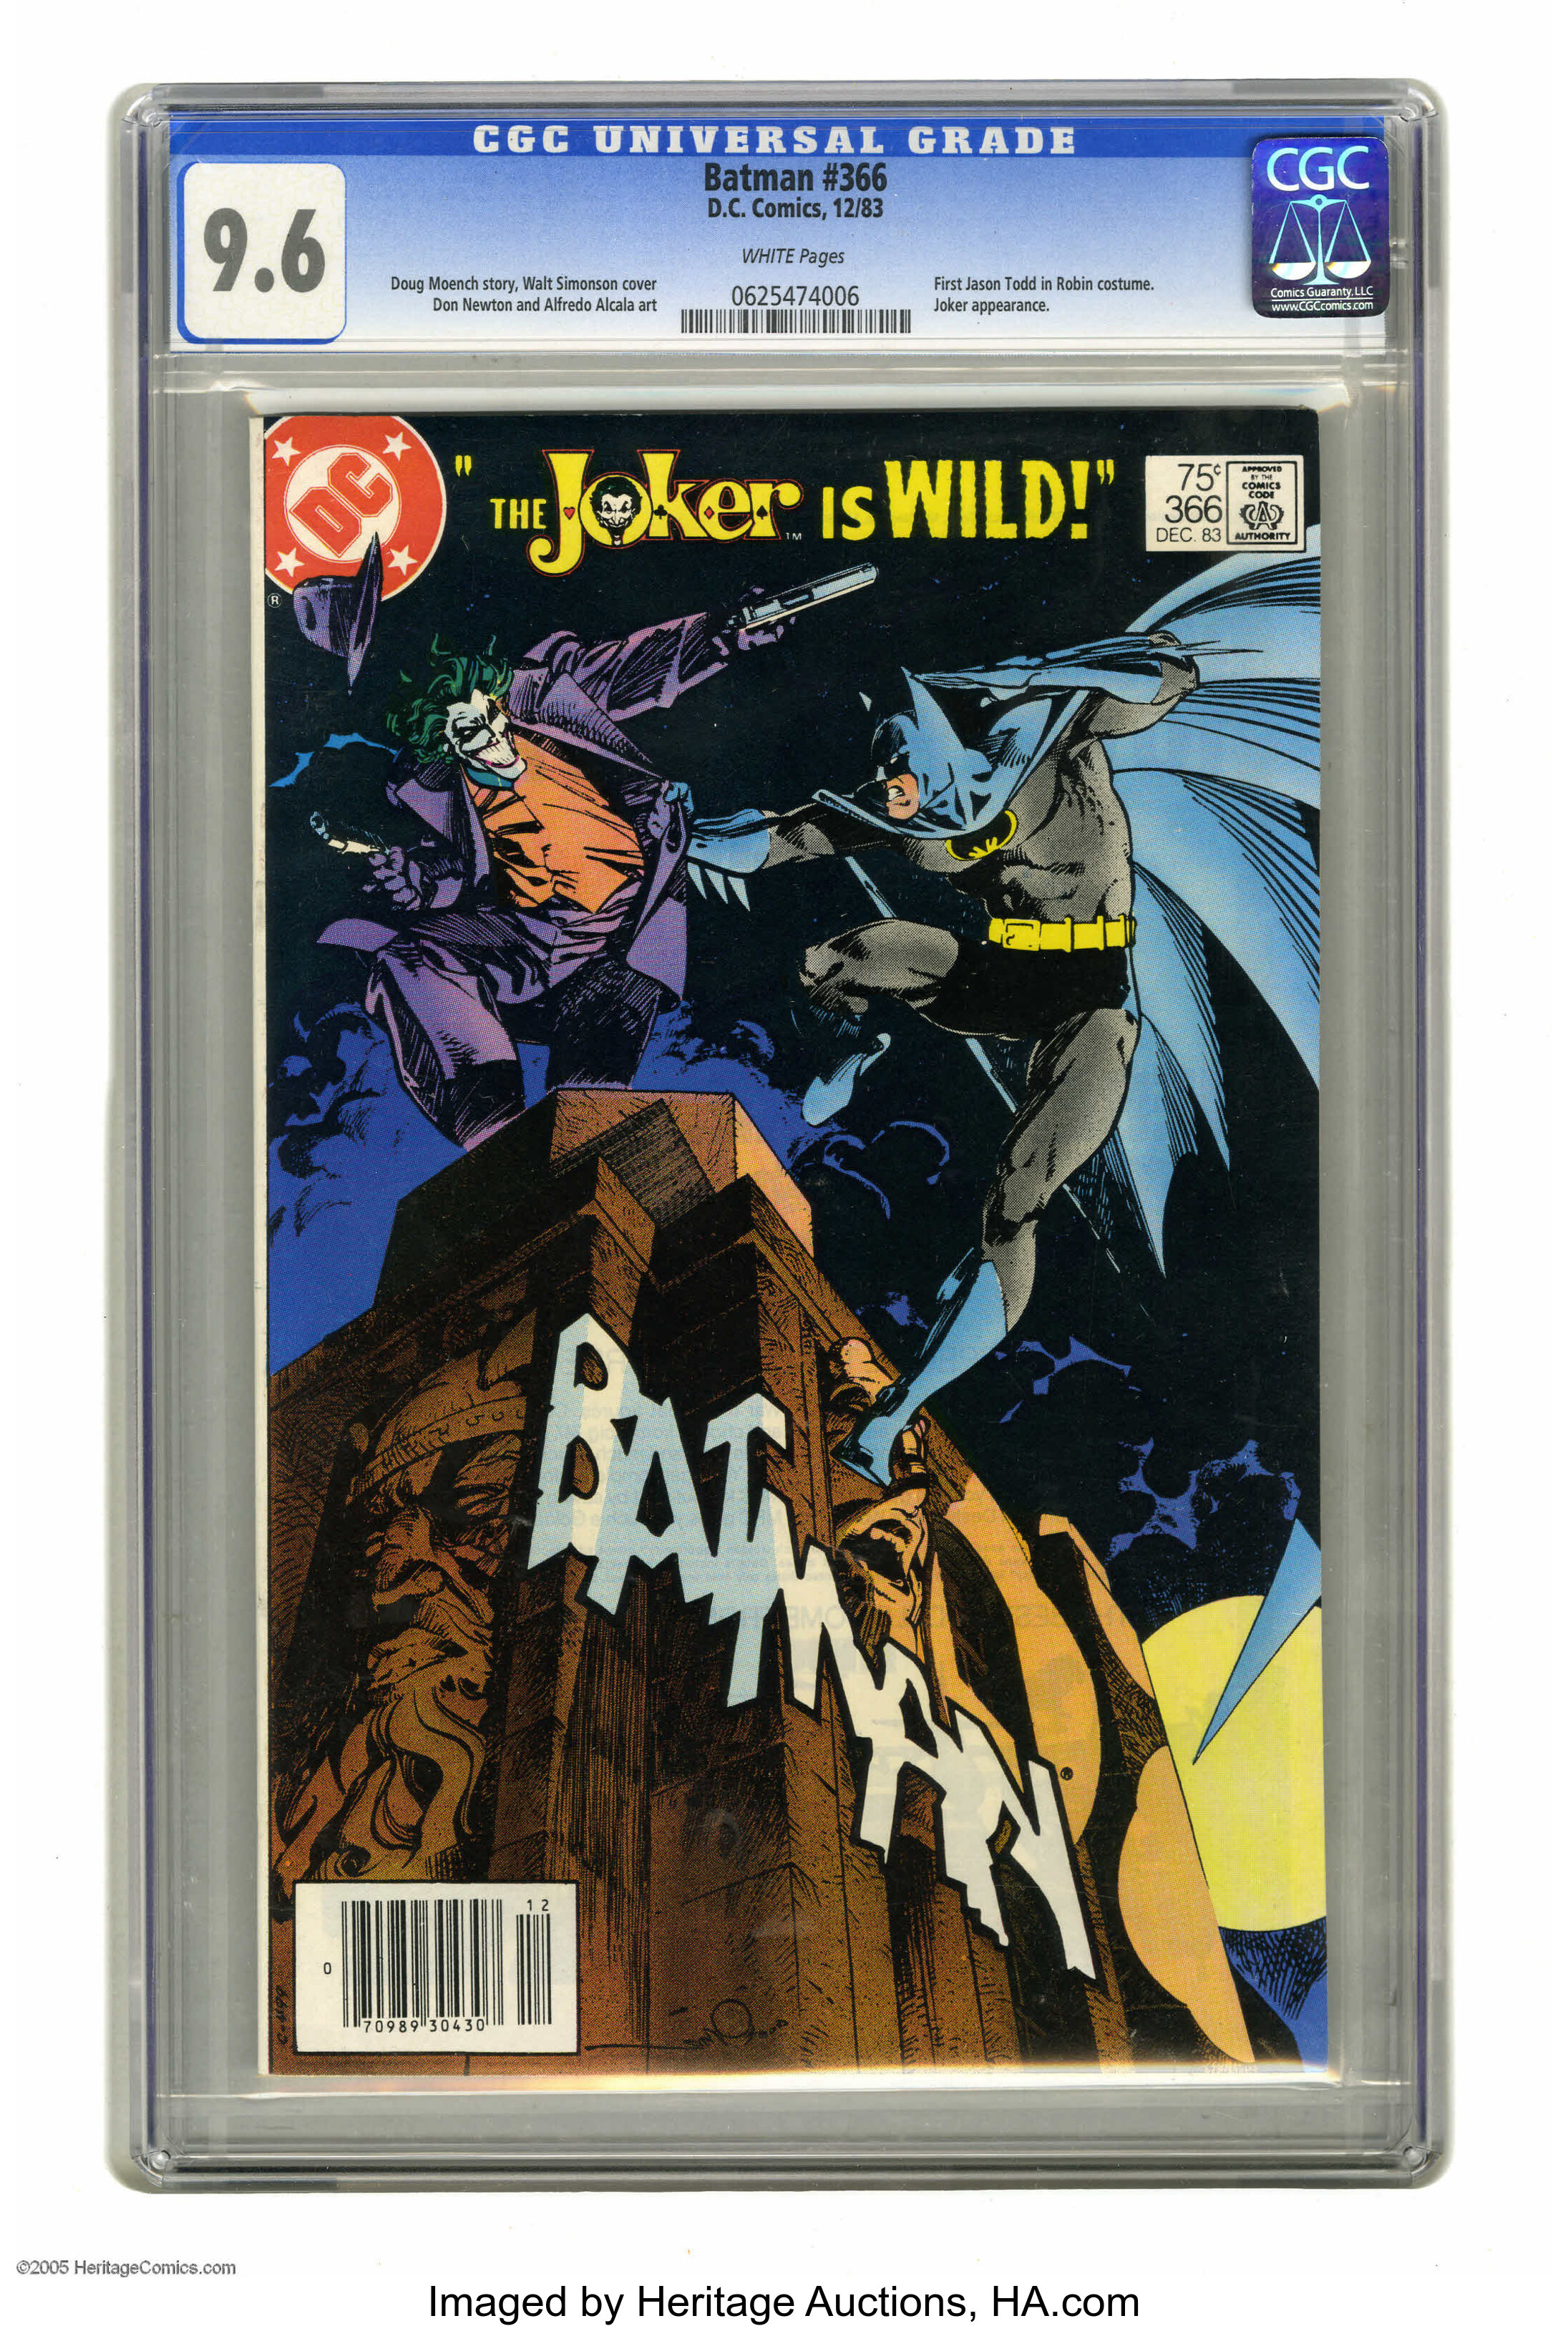 Batman #366 (DC, 1983) CGC NM+  White pages. First Jason Todd in | Lot  #16377 | Heritage Auctions